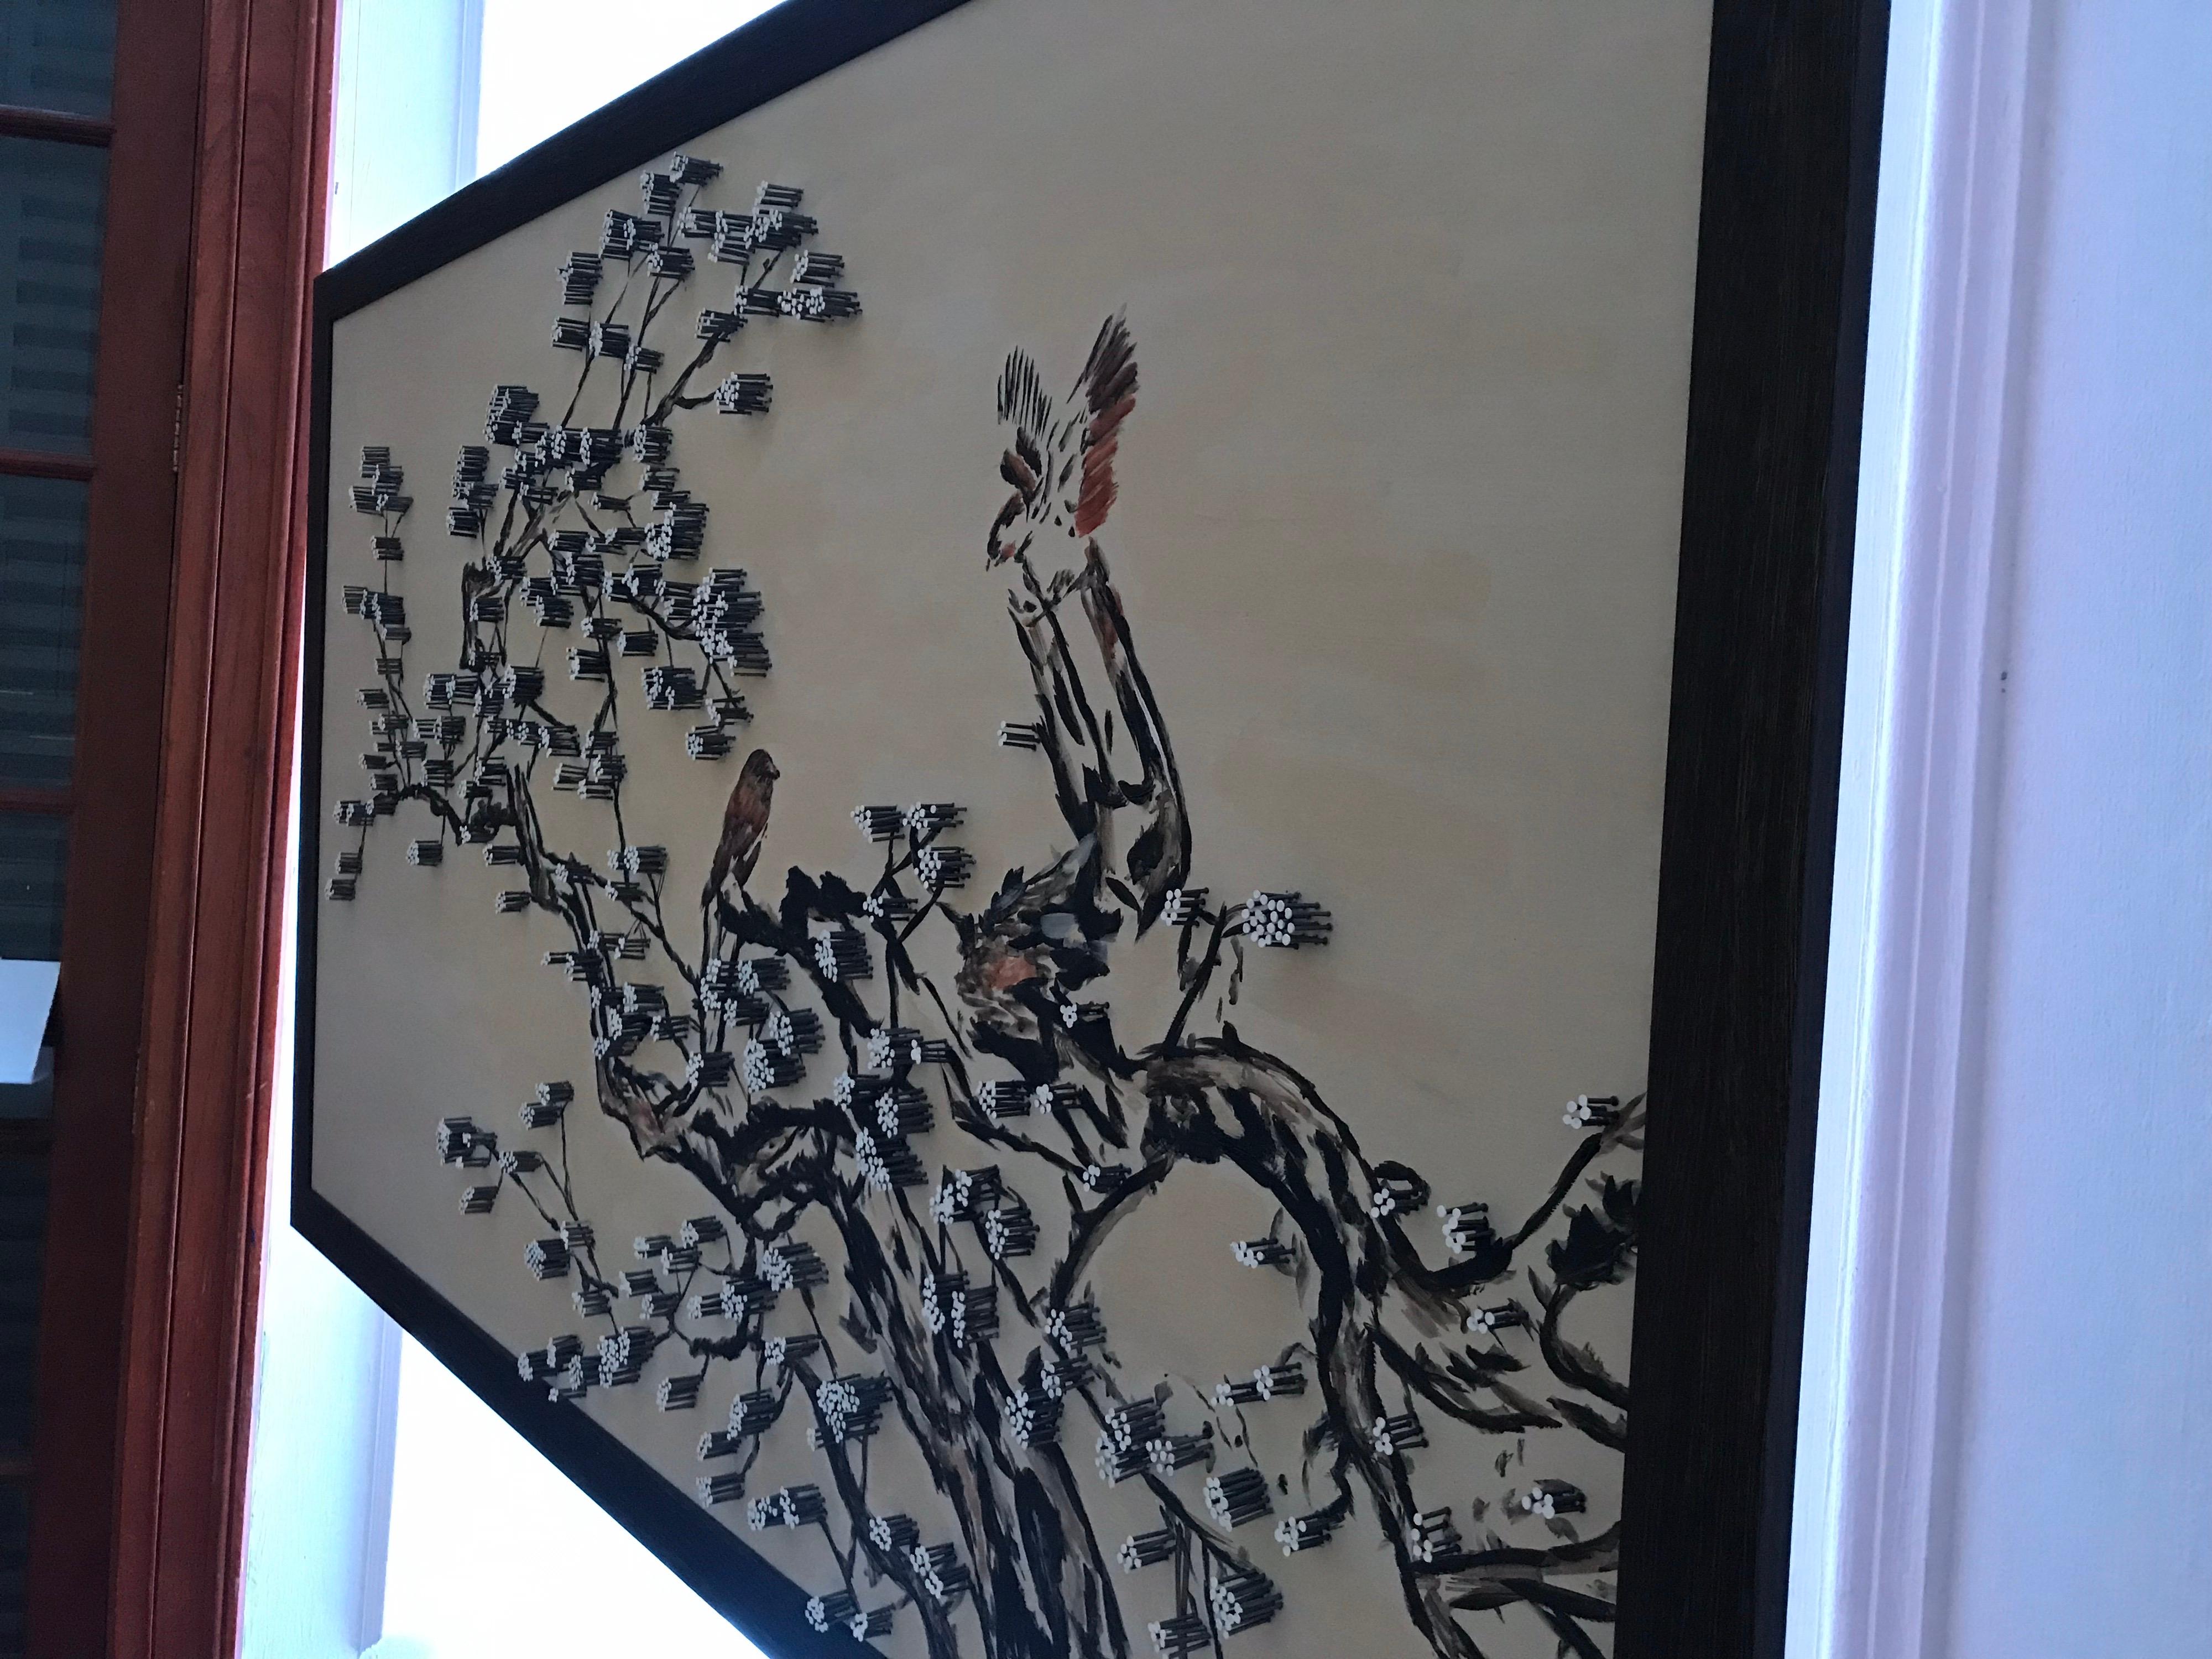 This beautiful cherry blossom tree painting is done on a wooden canvass with a mixed technique. The little flowers are metal nails which give it a 3D feeling to the art work. It was done by the artist in Mexico City and she was inspired by the